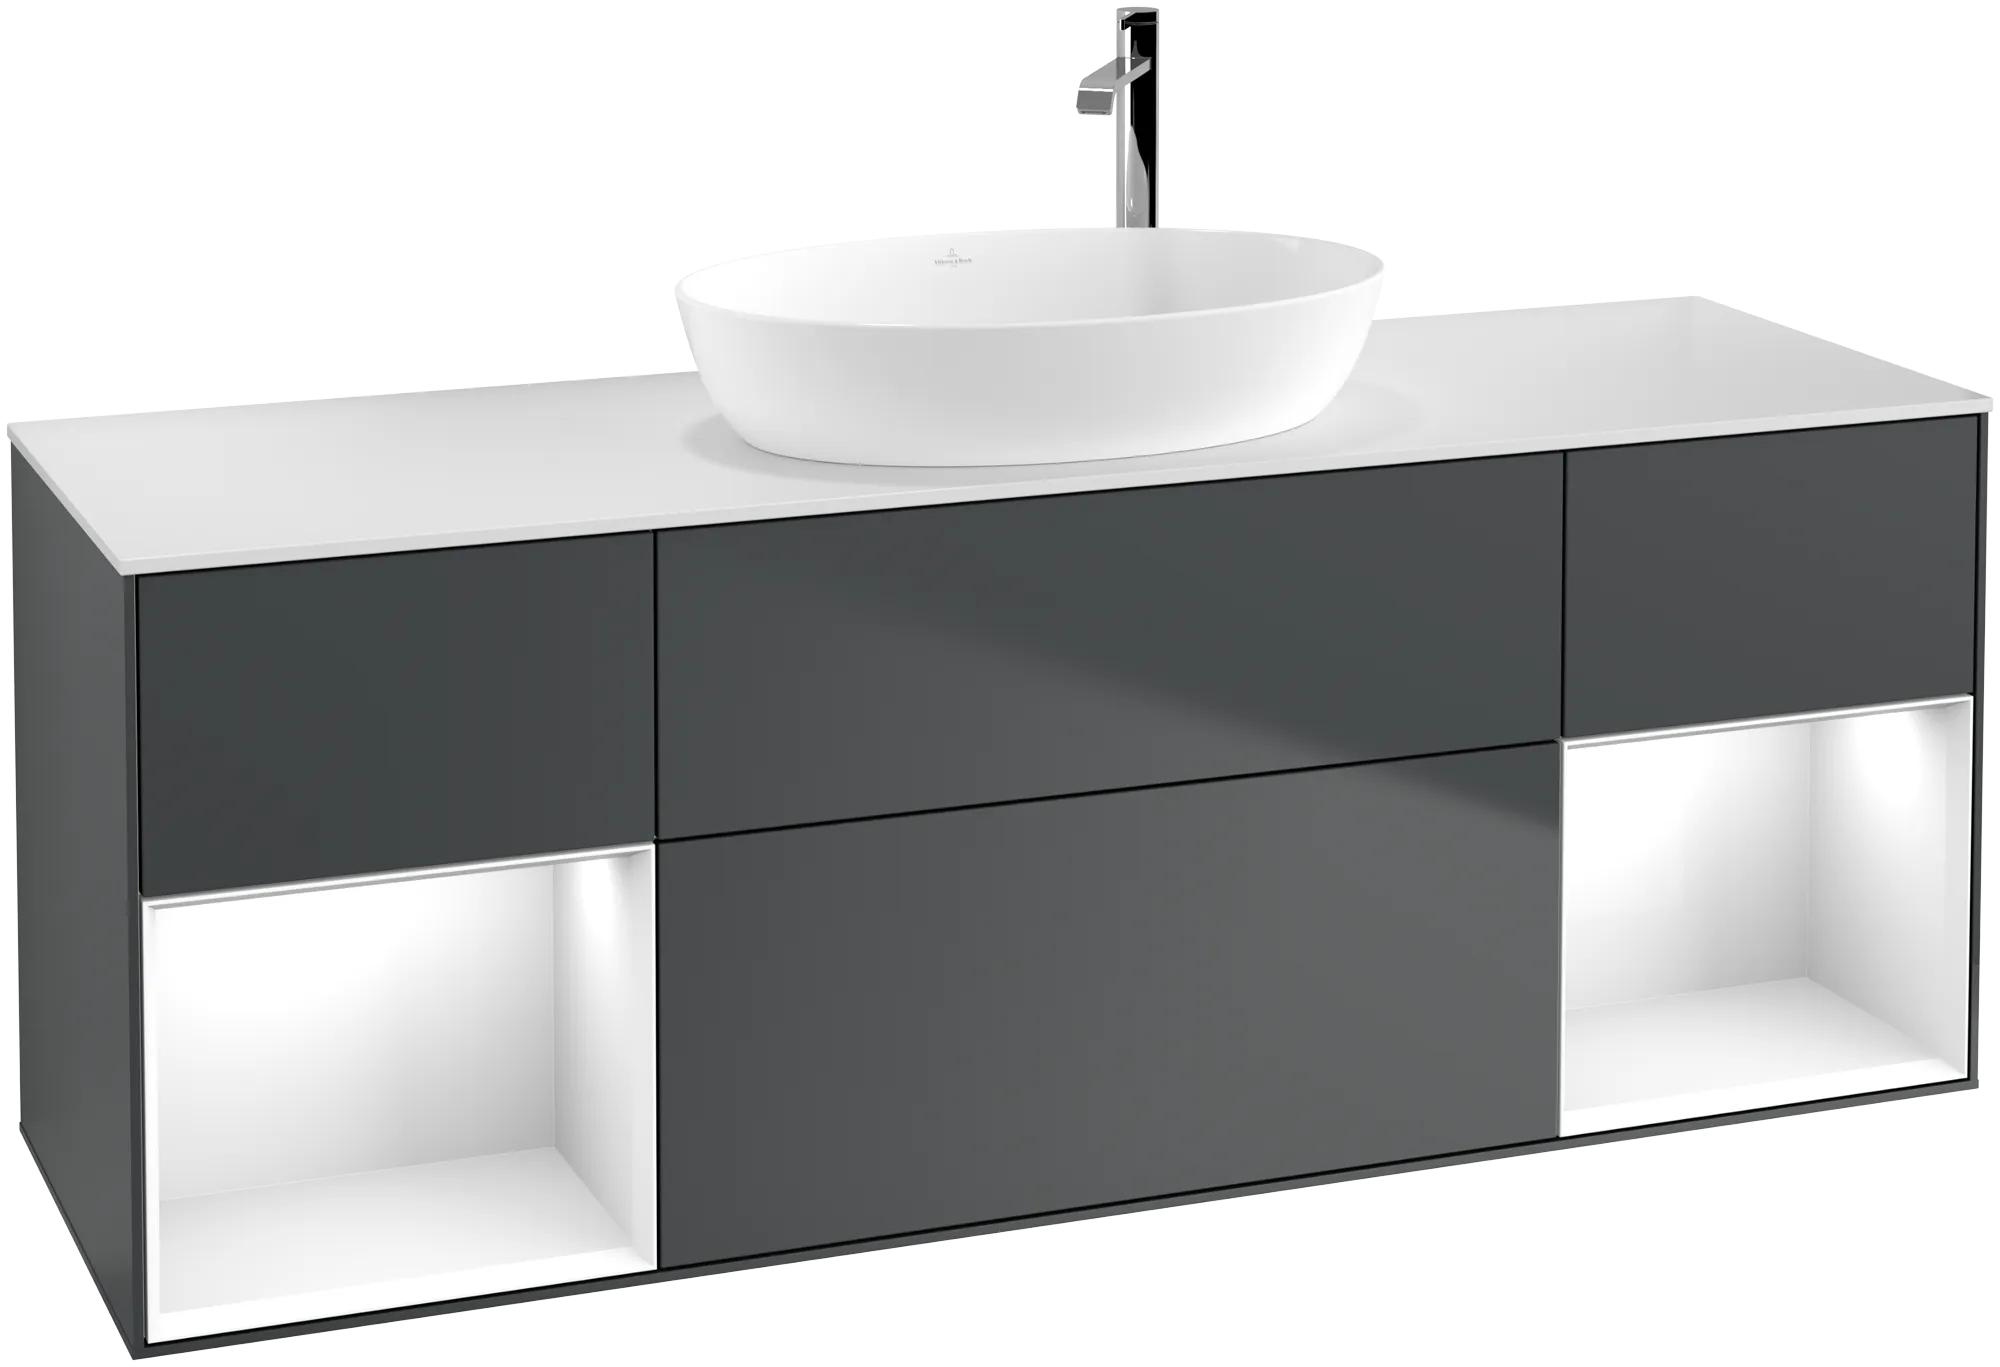 VILLEROY BOCH Finion Vanity unit, with lighting, 4 pull-out compartments, 1600 x 603 x 501 mm, Midnight Blue Matt Lacquer / Glossy White Lacquer / Glass White Matt #G981GFHG resmi